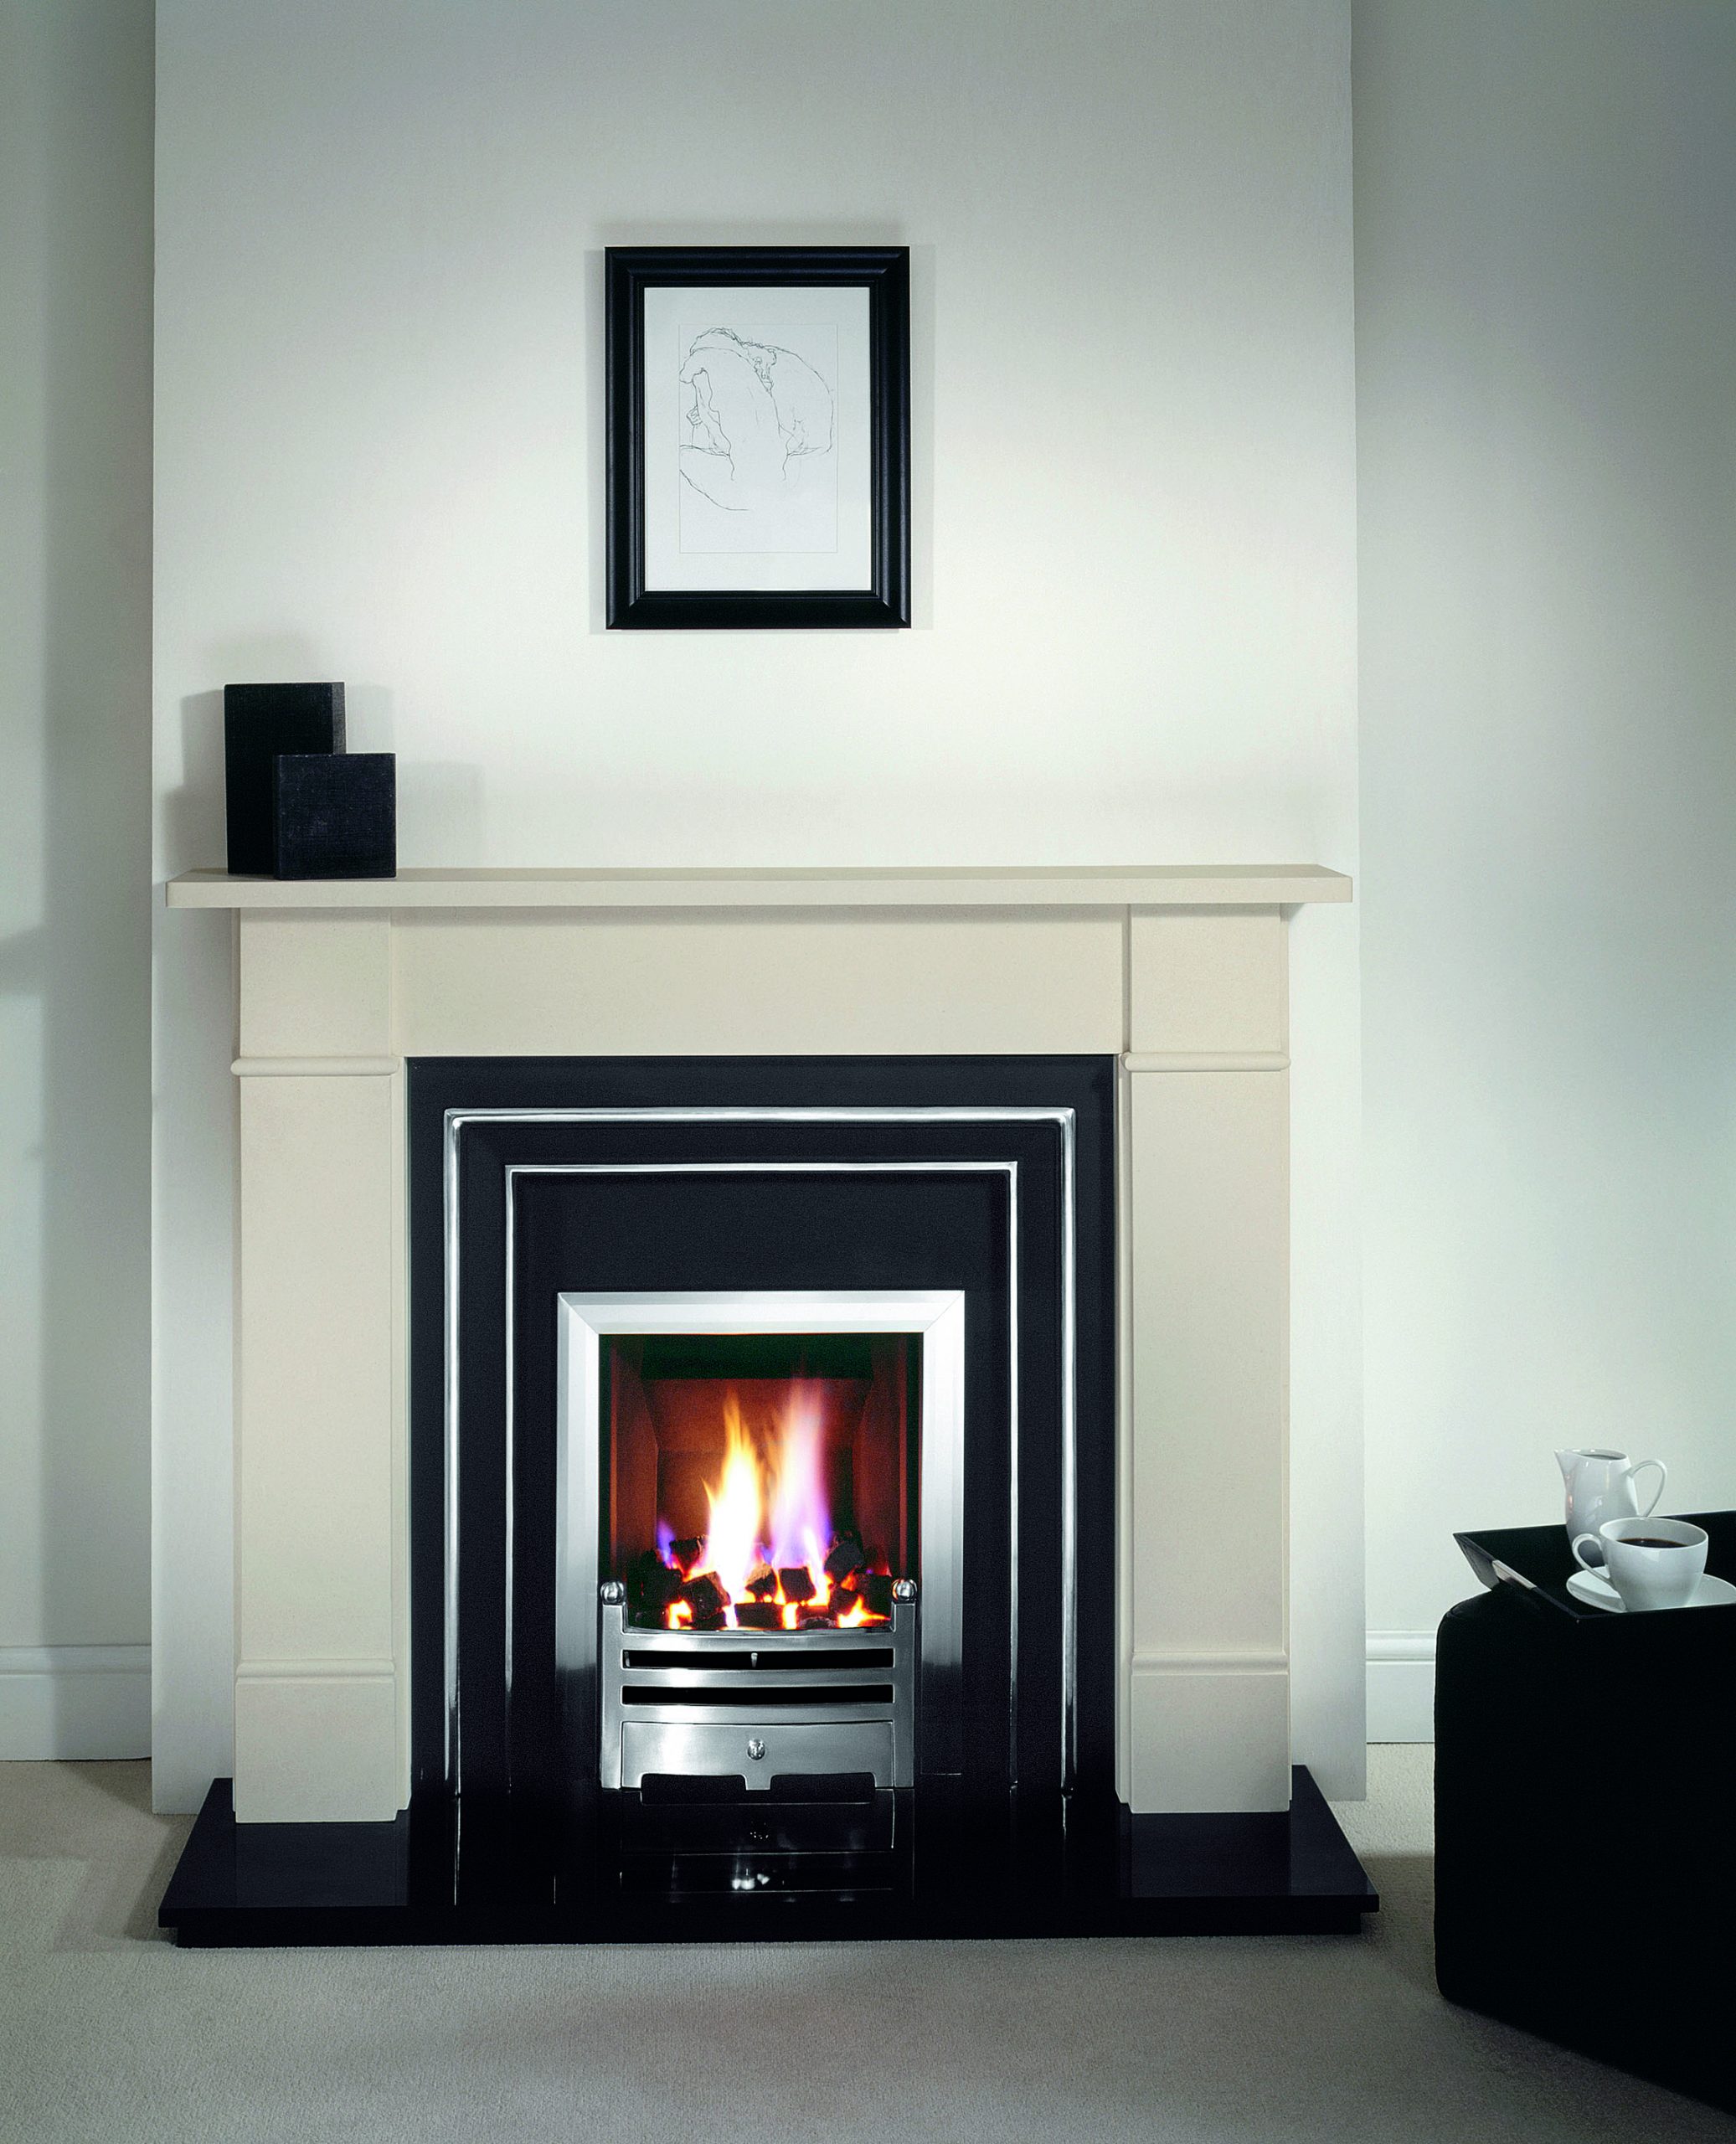 Hamilton Fireplace Awesome Fireplace Gallery Wolverhampton Fireplaces & Stoves Ltd